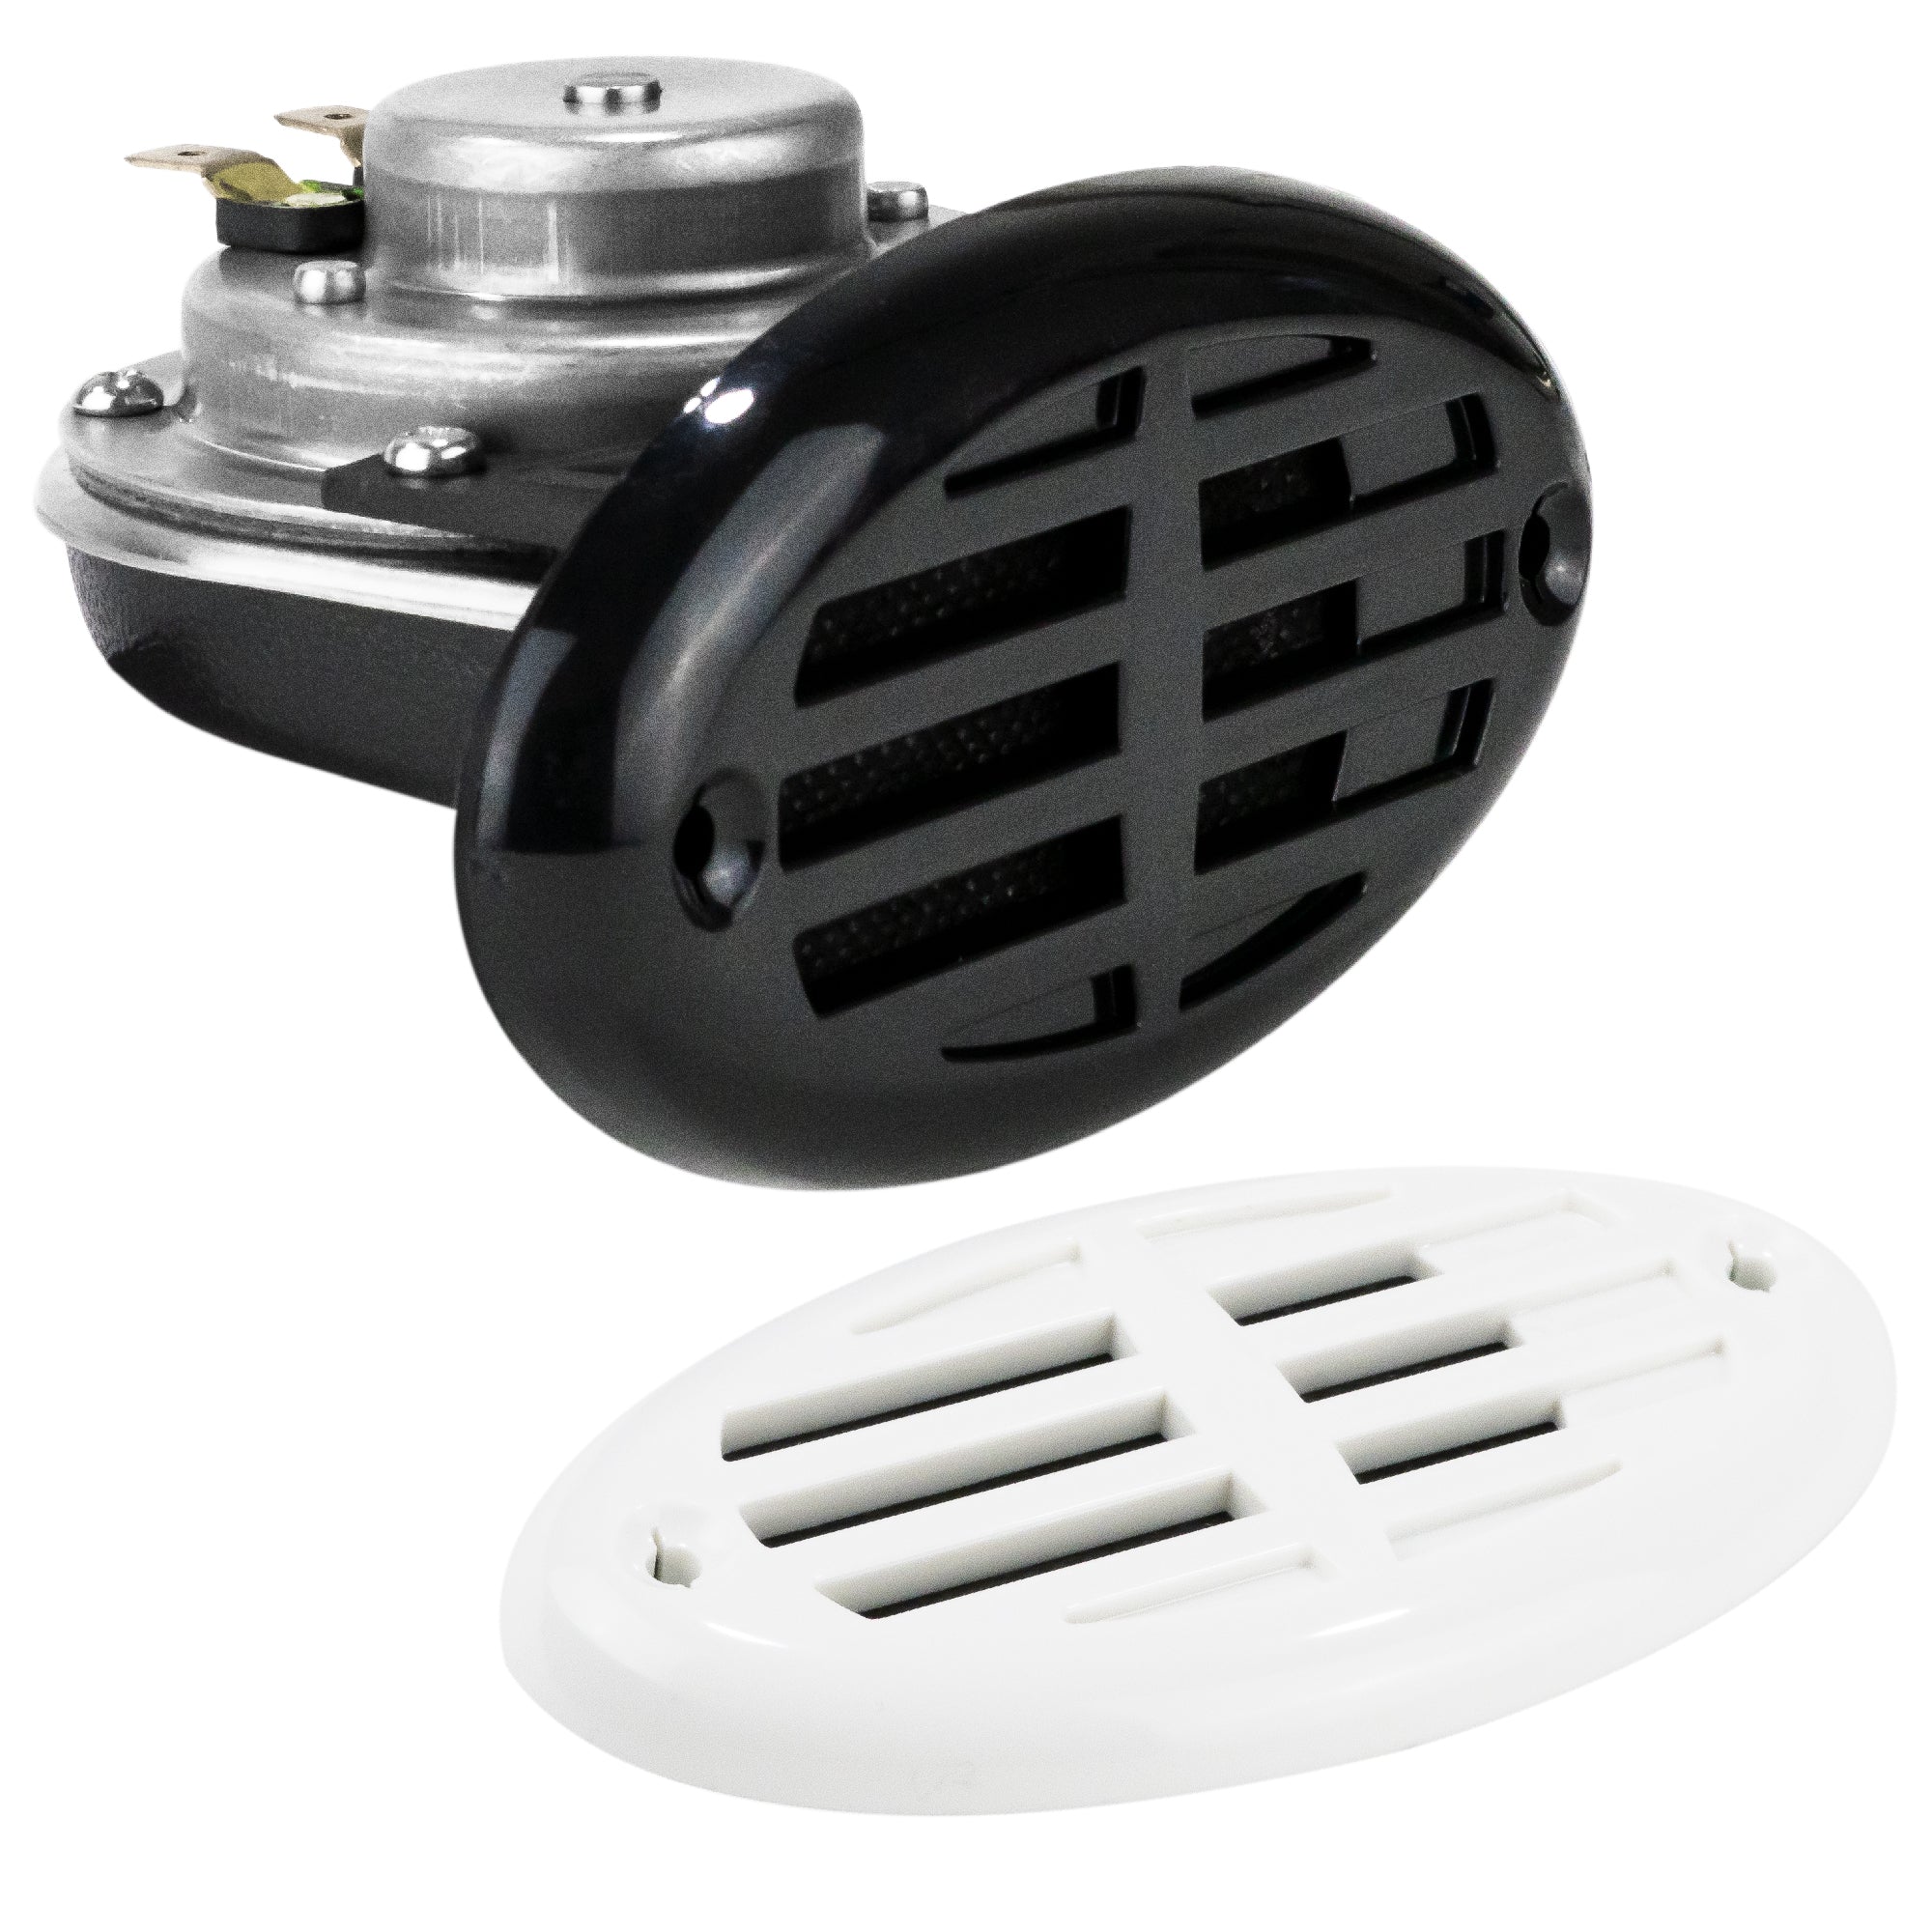 Drop-in Hidden Boat Horn with Black and White Grills, 12V - 110+5 dB 